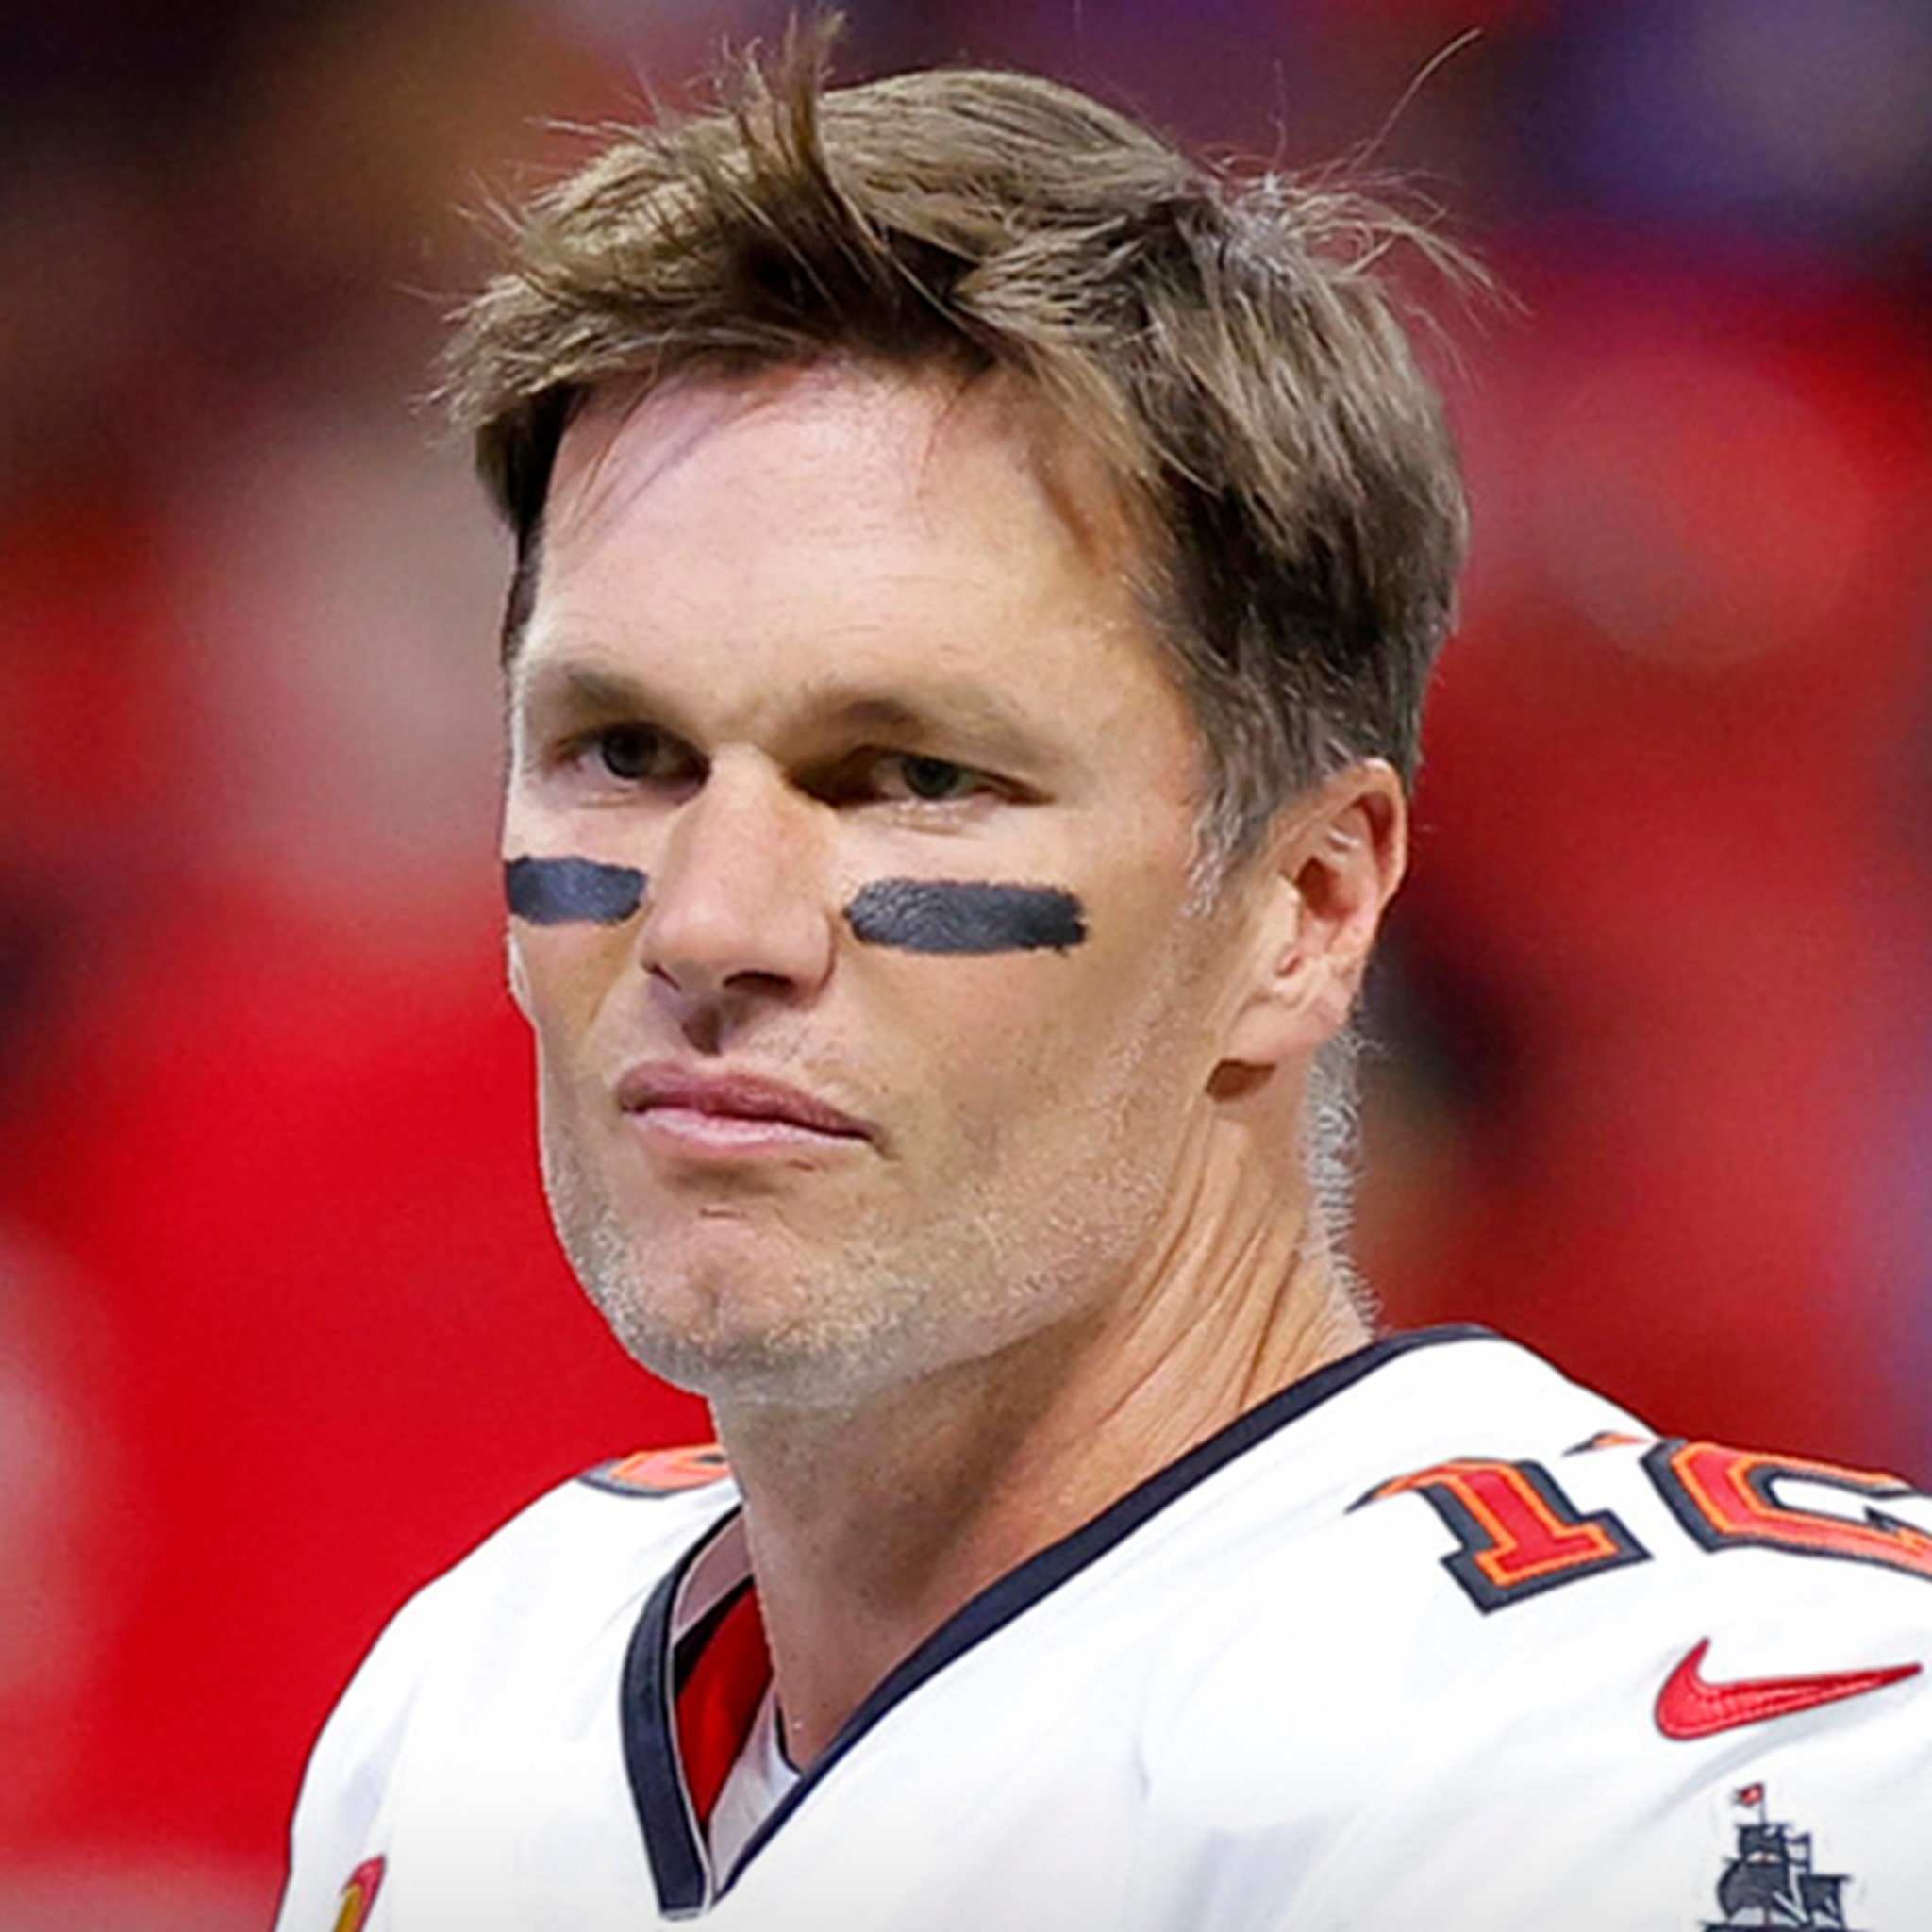 Tom Brady Officially Files Retirement Papers, It's Real This Time!